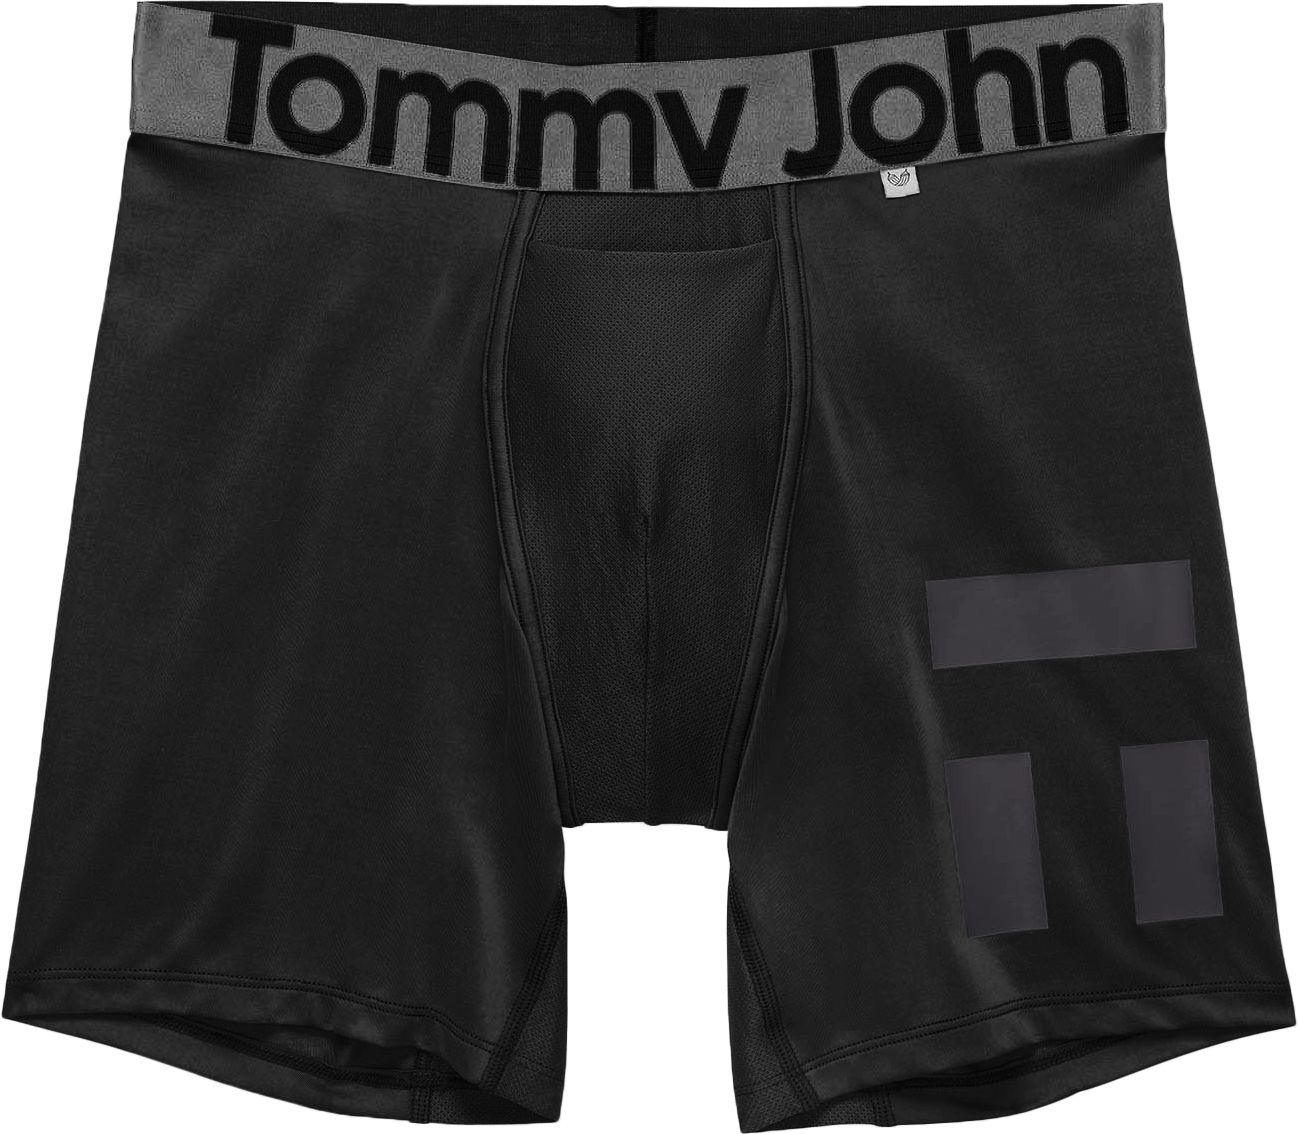 Air Mesh Hammock Pouch 6 Inch Boxer Brief Black M by Tommy John